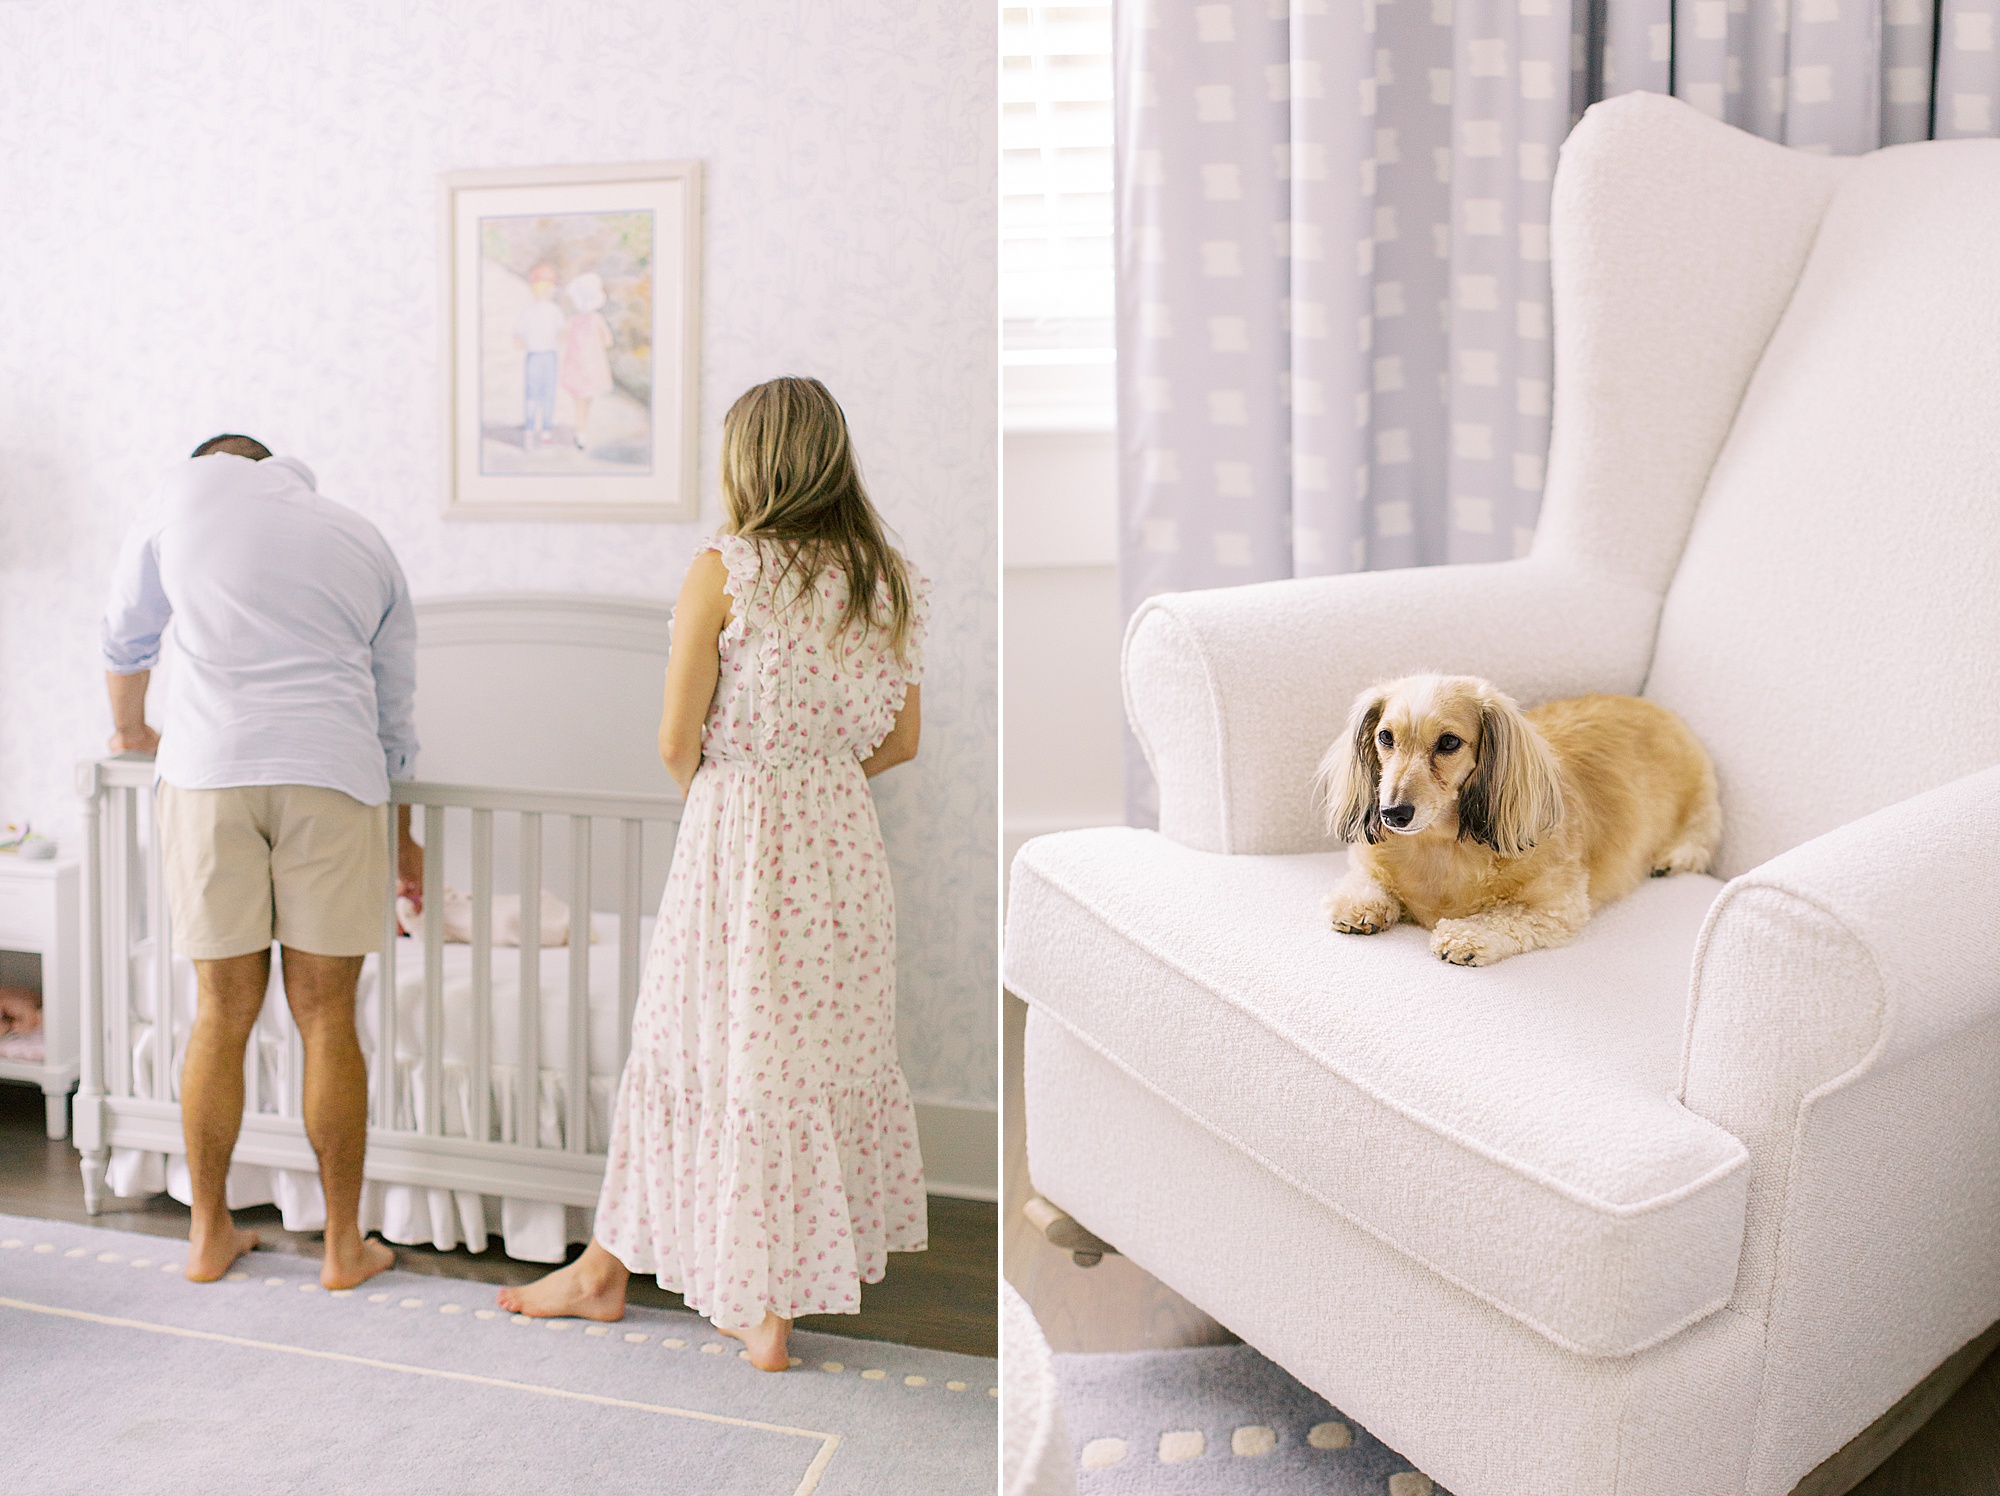 parents look at baby over crib while dog sits in chair